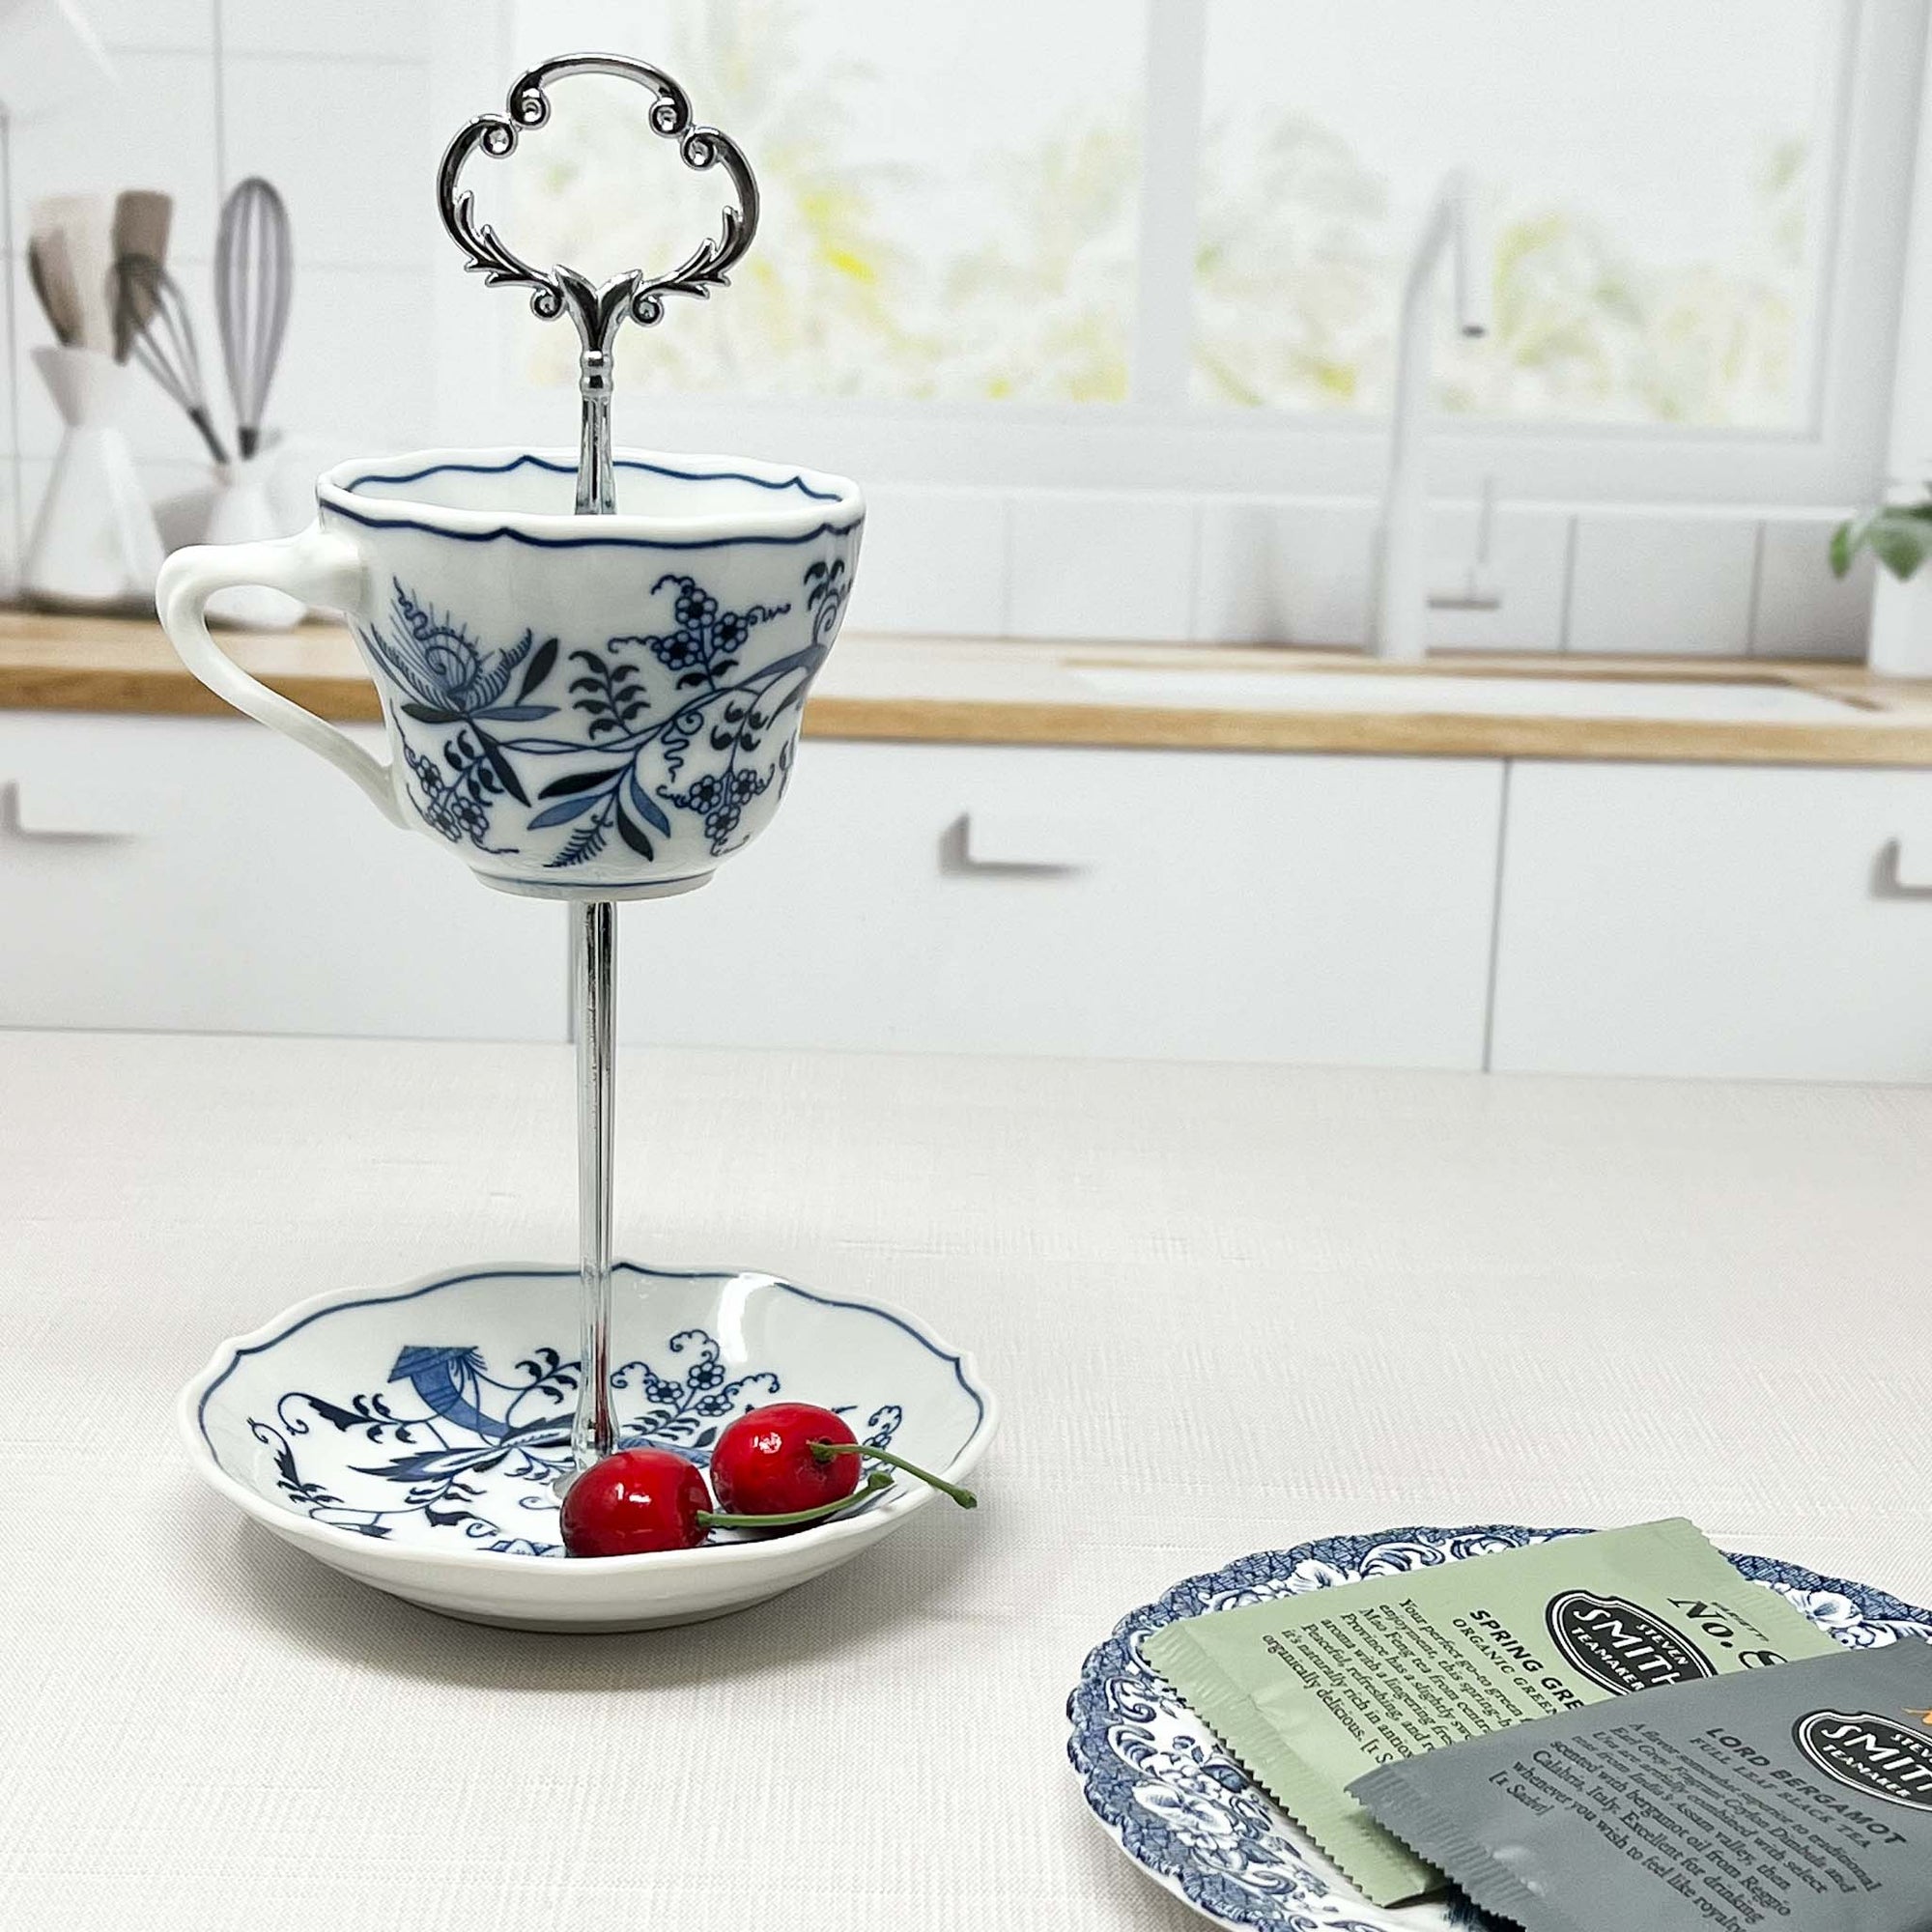 Vintage Blue and White Dishes – The Brooklyn Teacup